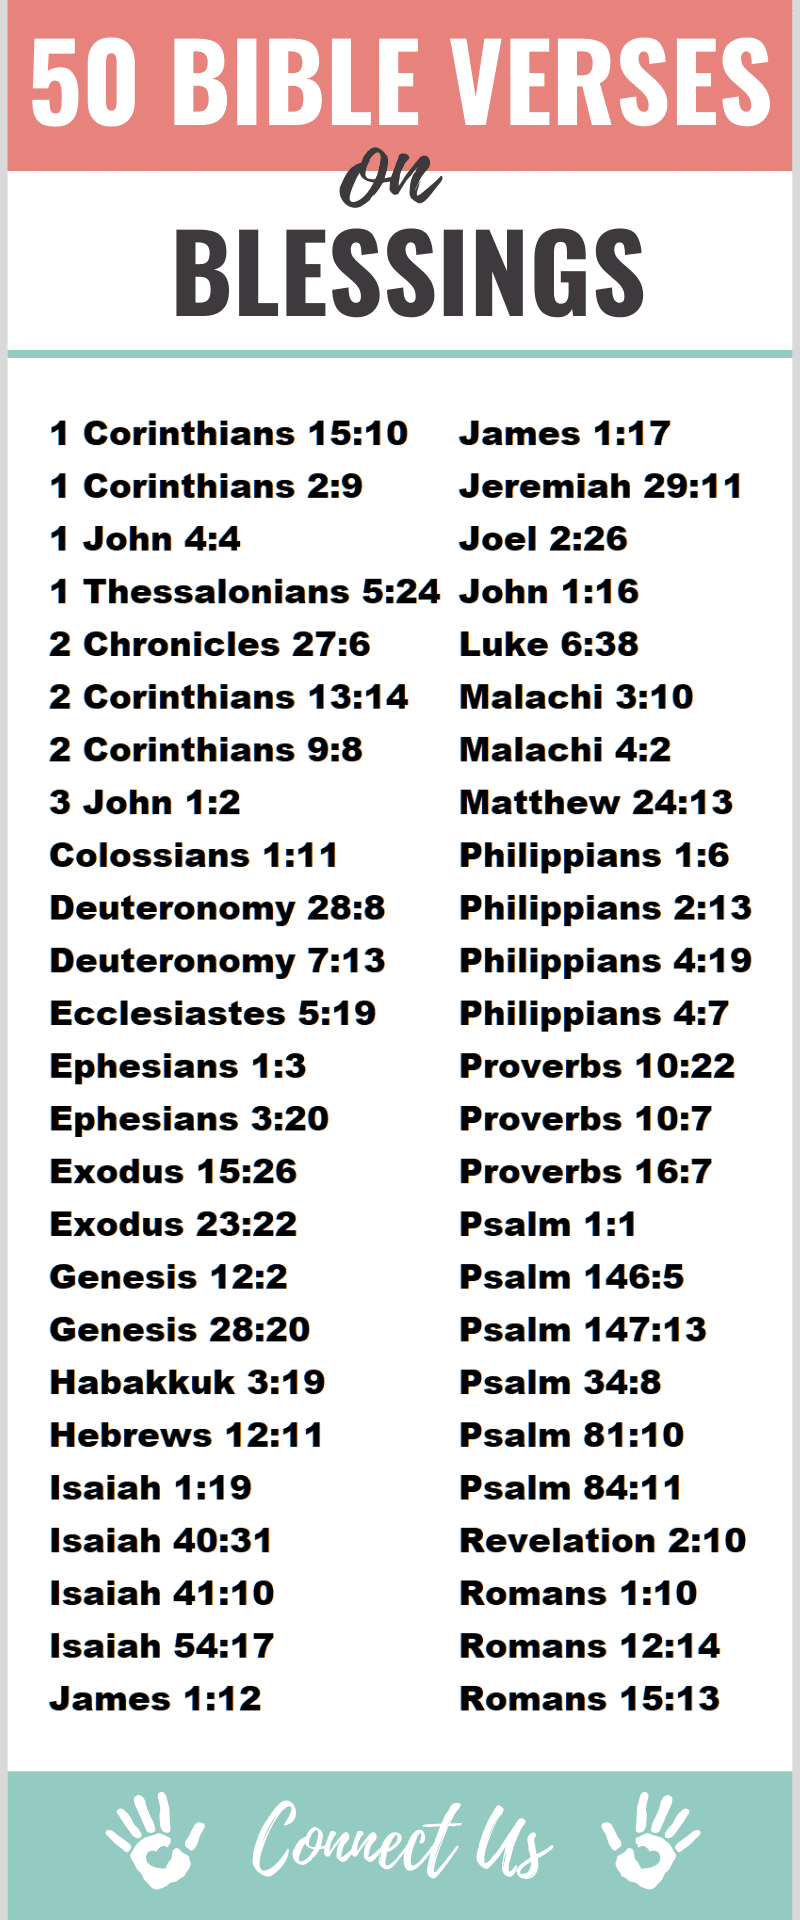 Bible Verses on Blessings